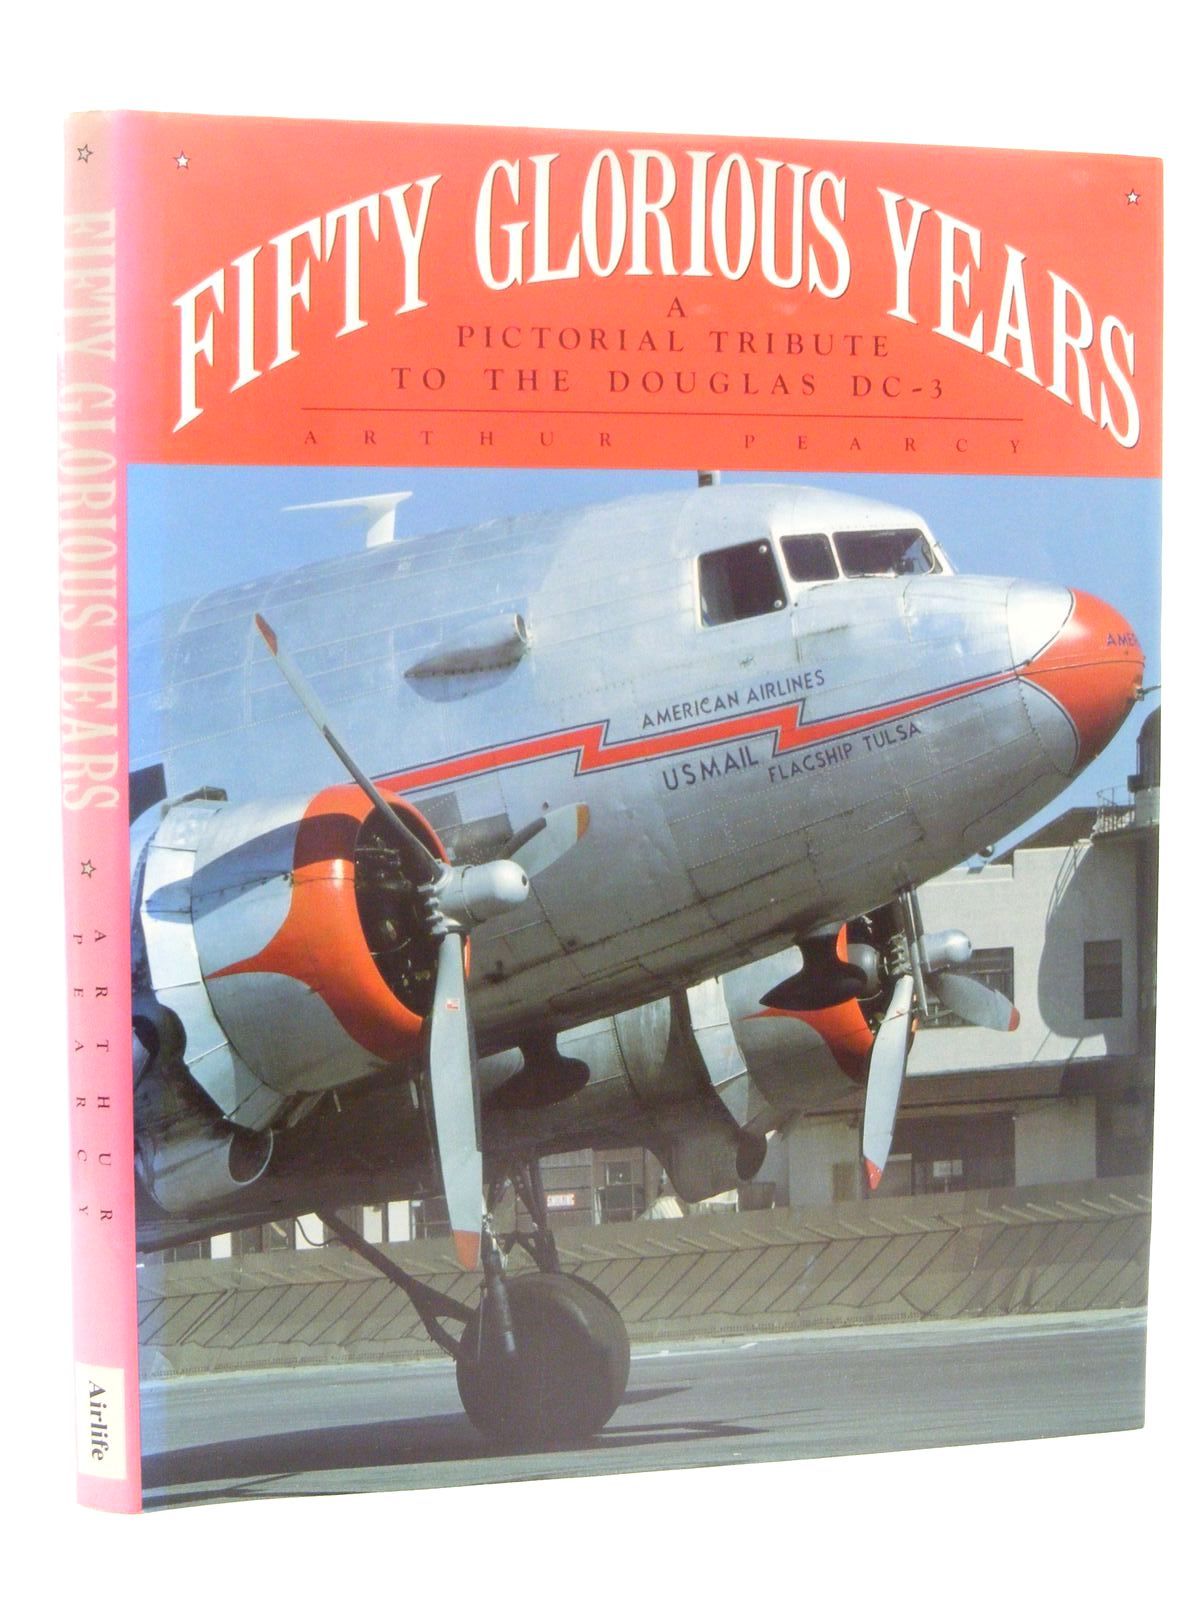 Photo of FIFTY GLORIOUS YEARS written by Pearcy, Arthur published by Airlife (STOCK CODE: 1610331)  for sale by Stella & Rose's Books